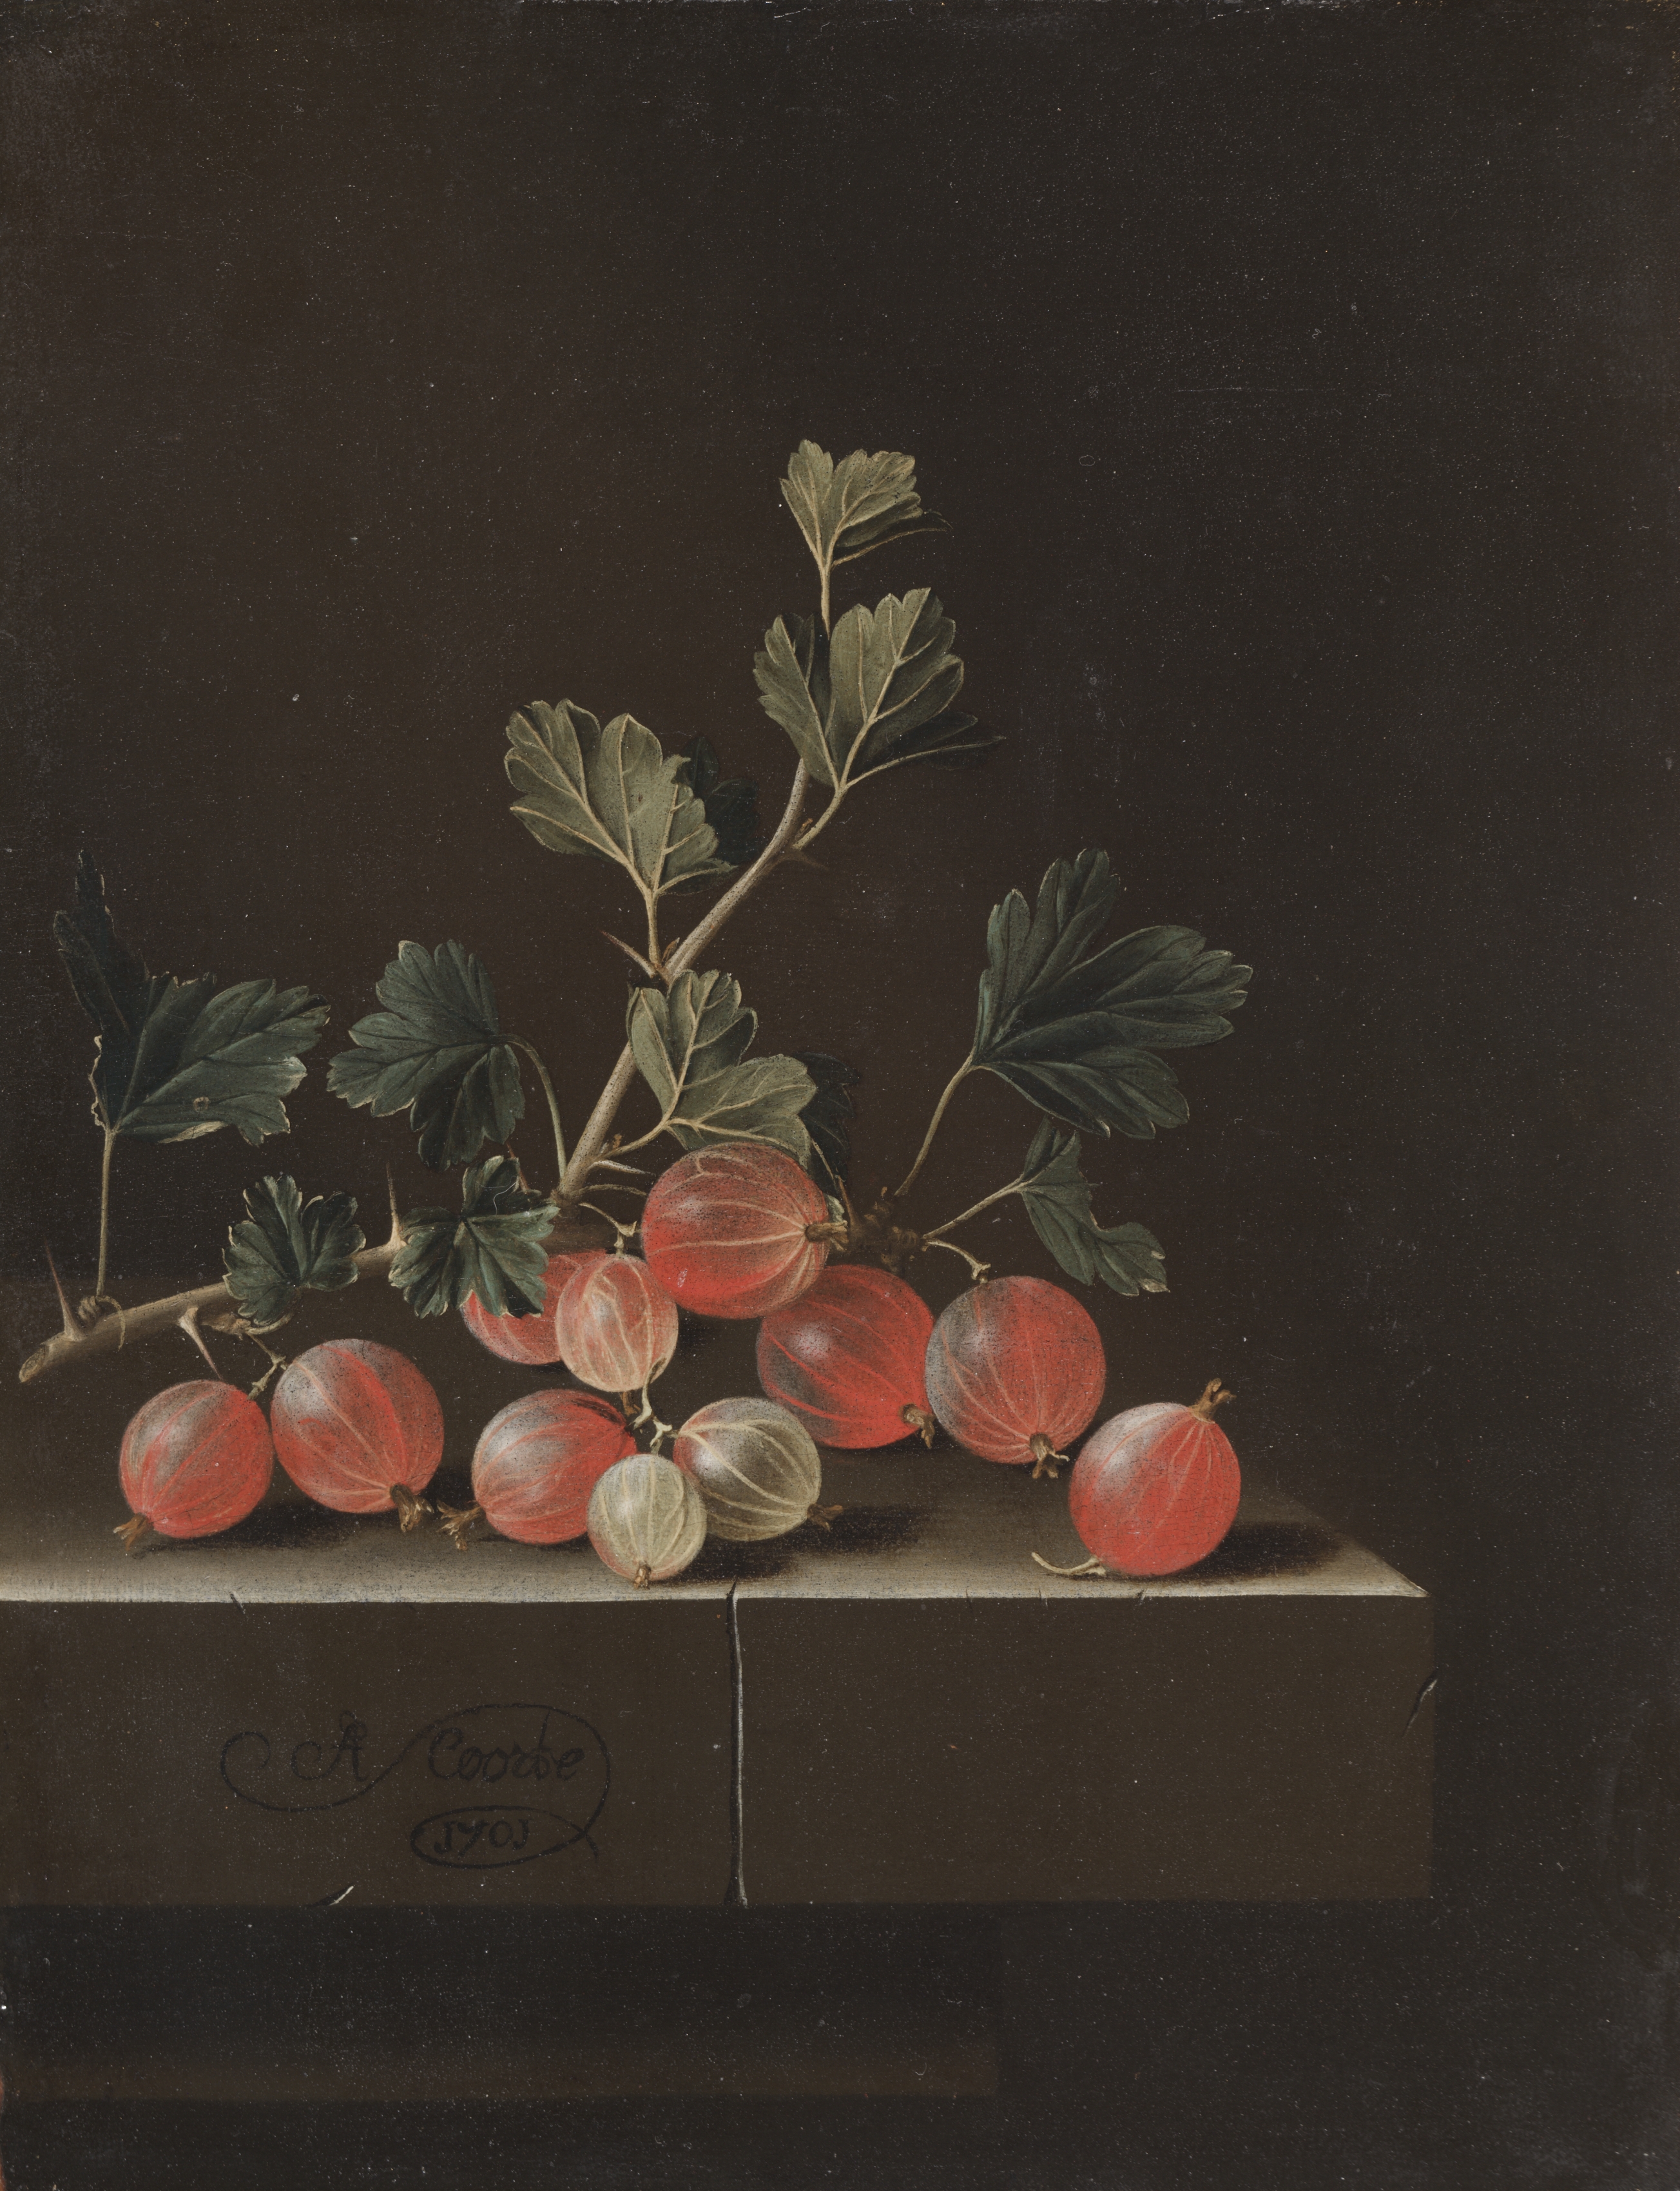 Gooseberries on a Table